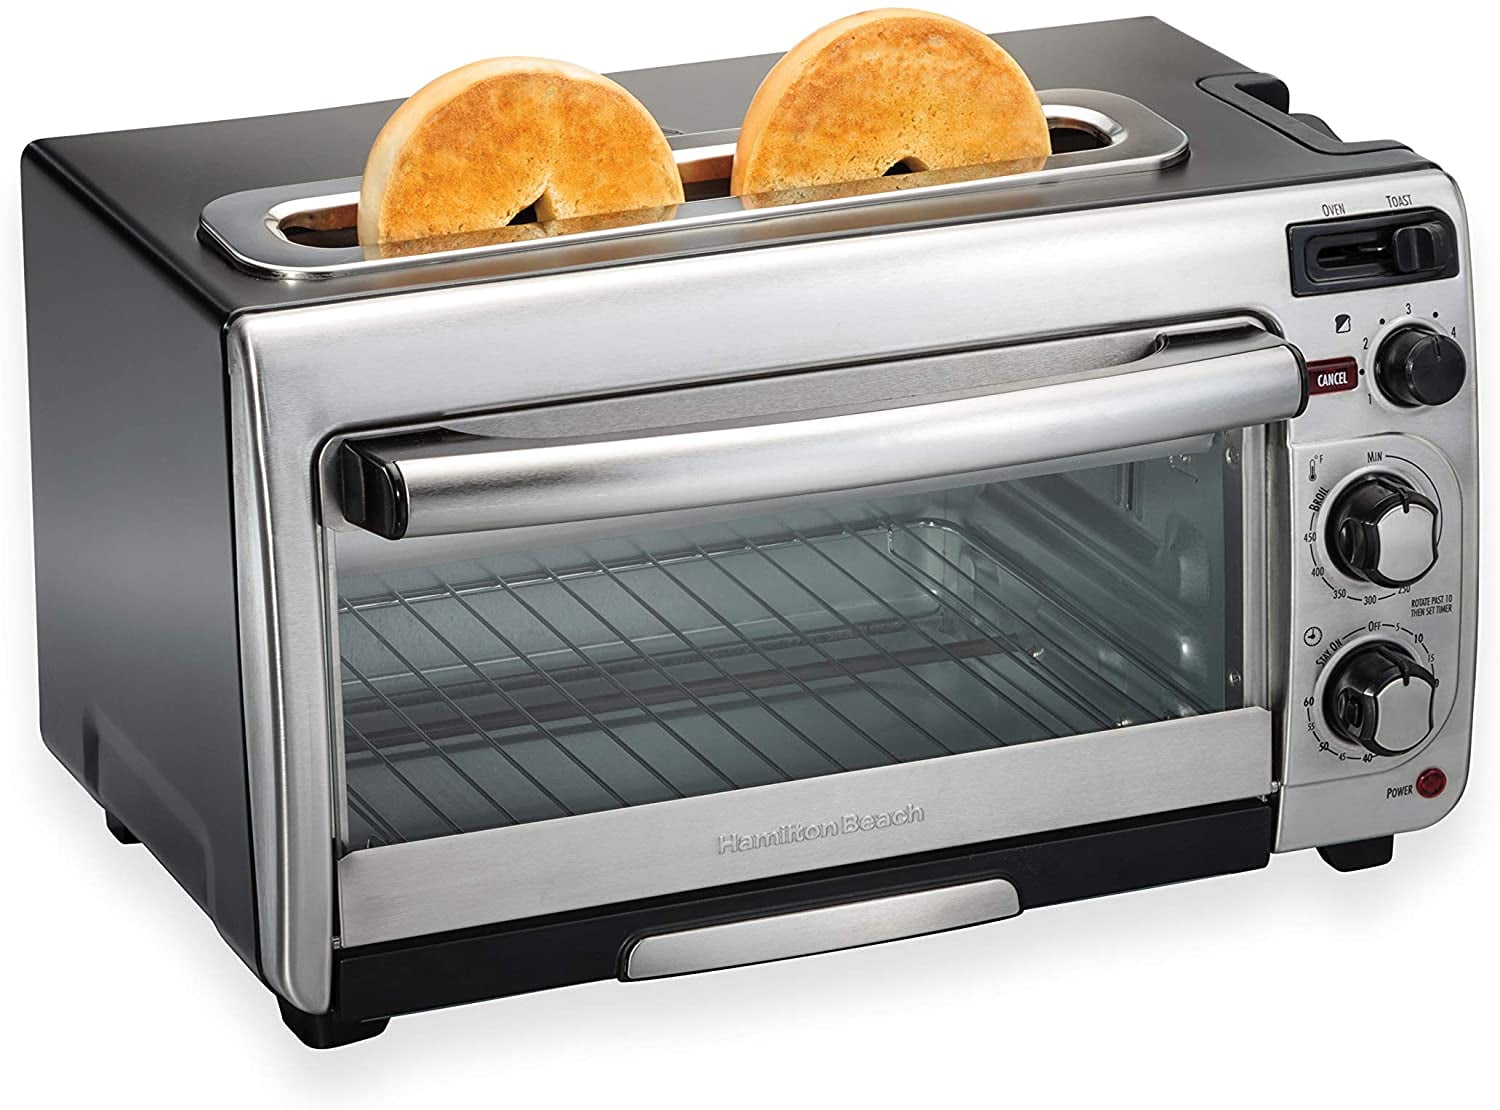 2 In 1 Toaster Oven Stainless Steel